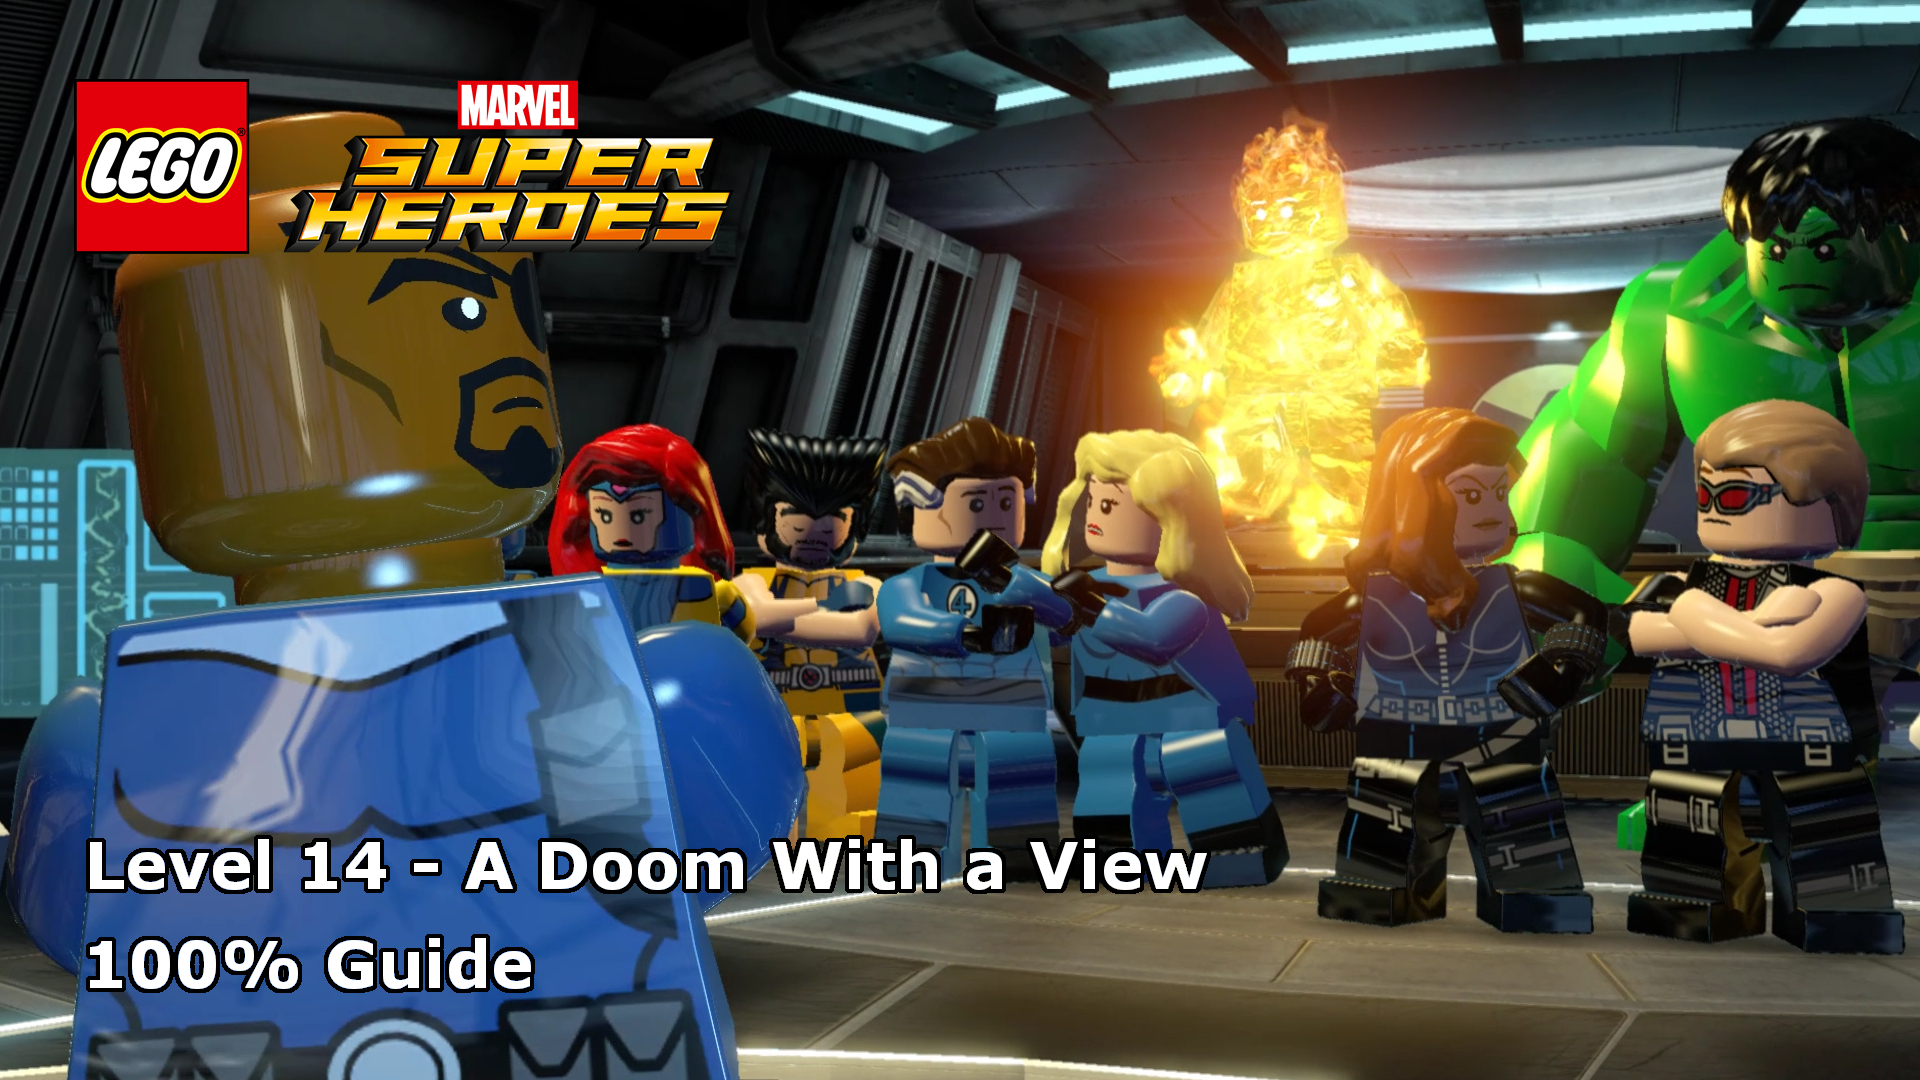 Lego Marvel Super Heroes – A Doom with a 100% Guide